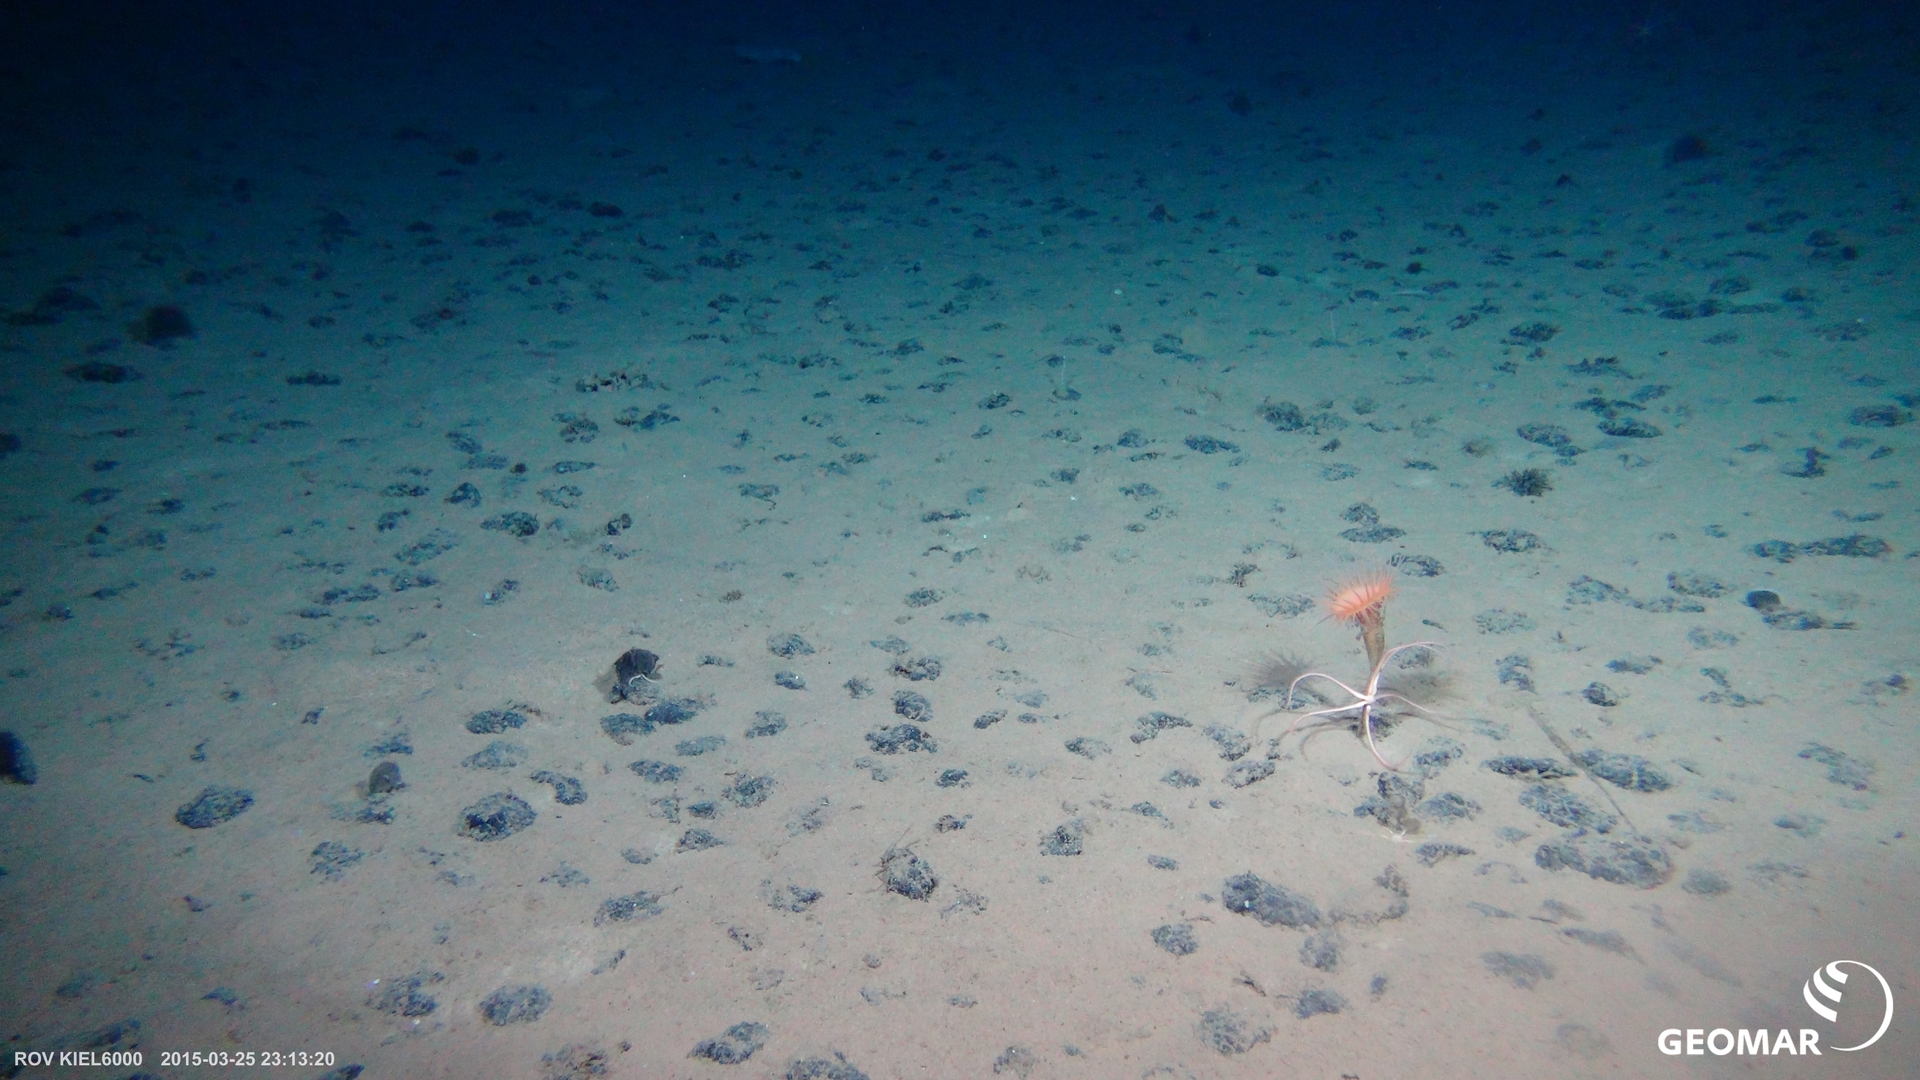 NodulesOnSeafloor_with_SeaAnemone_and_Ophiuroid_SO239_CCZ_ROVKiel6000